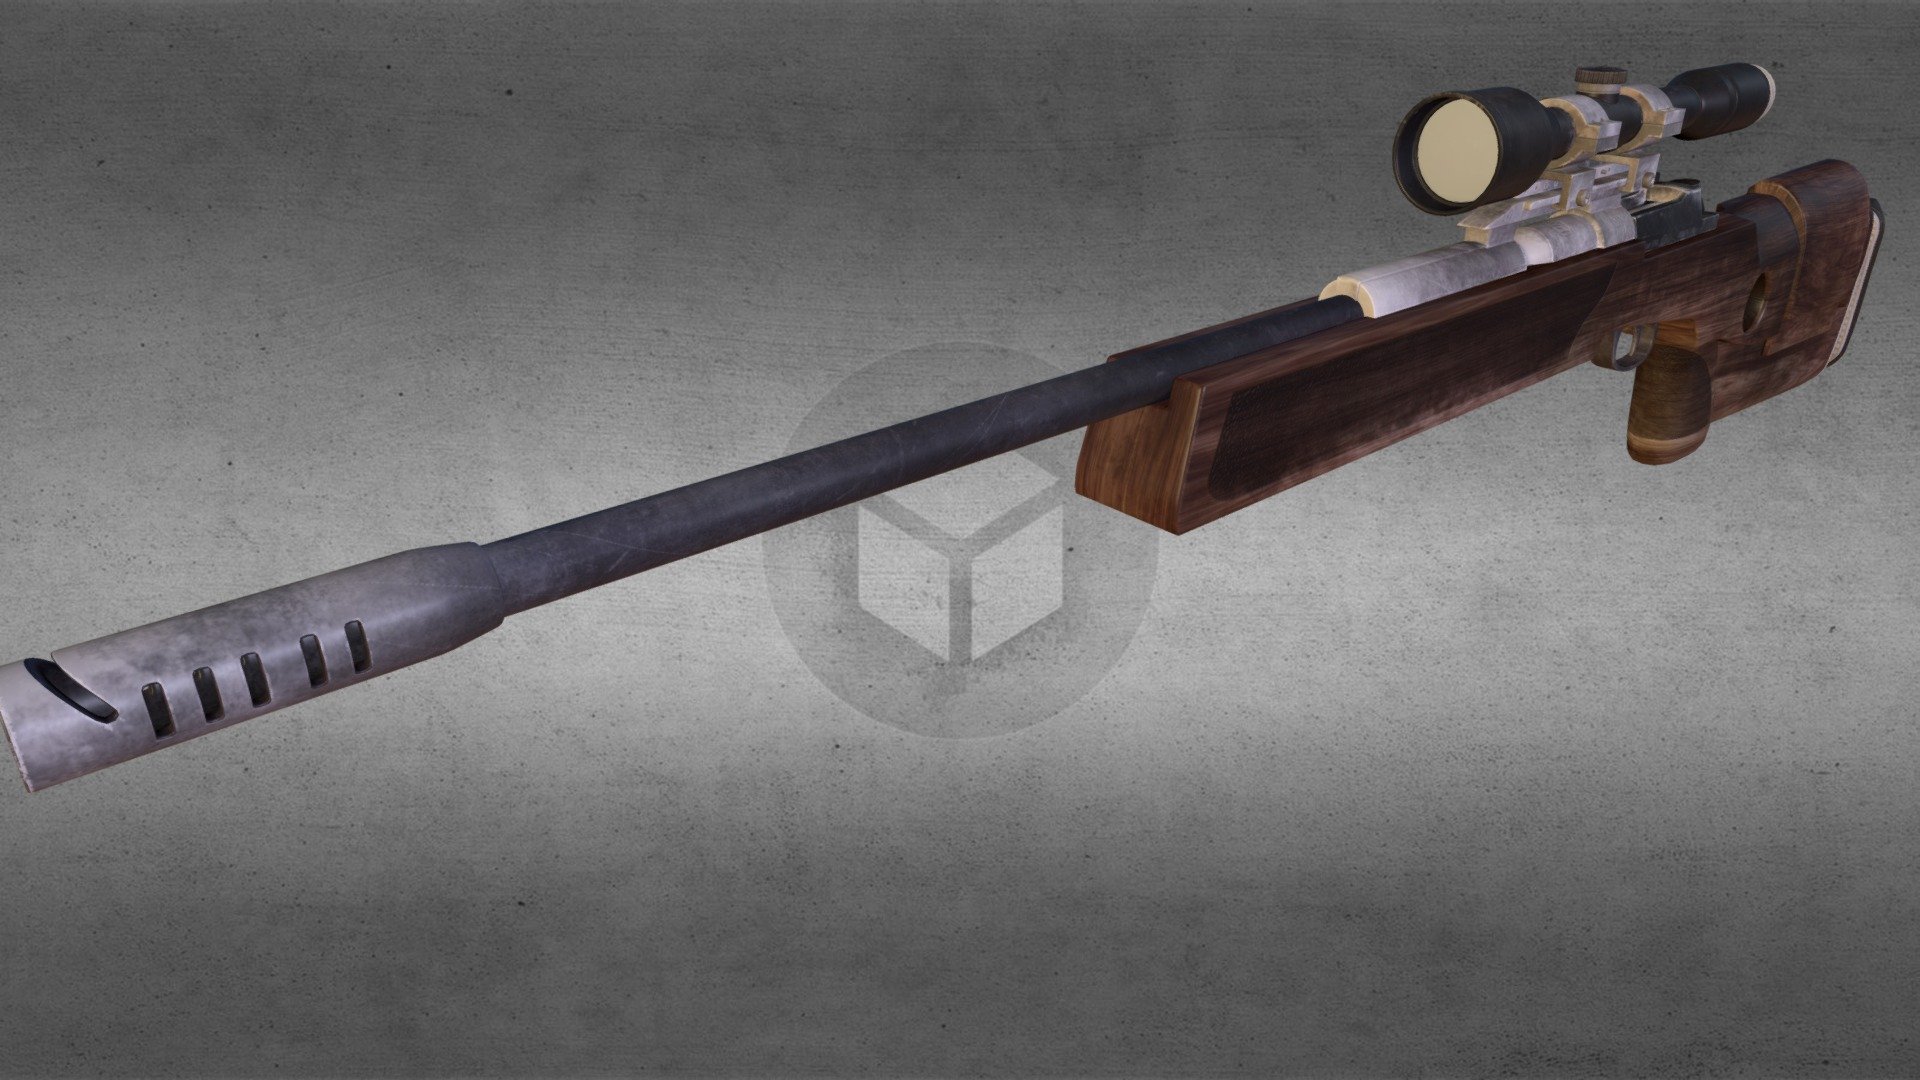 The Mauser SP66 sniper rifle was designed to fire a .308W round from a 5 round clip. It is highly accurate at long ranges when combined with a good scope. -The War Z - Mauser SP66 - 3D model by Revel 3d model